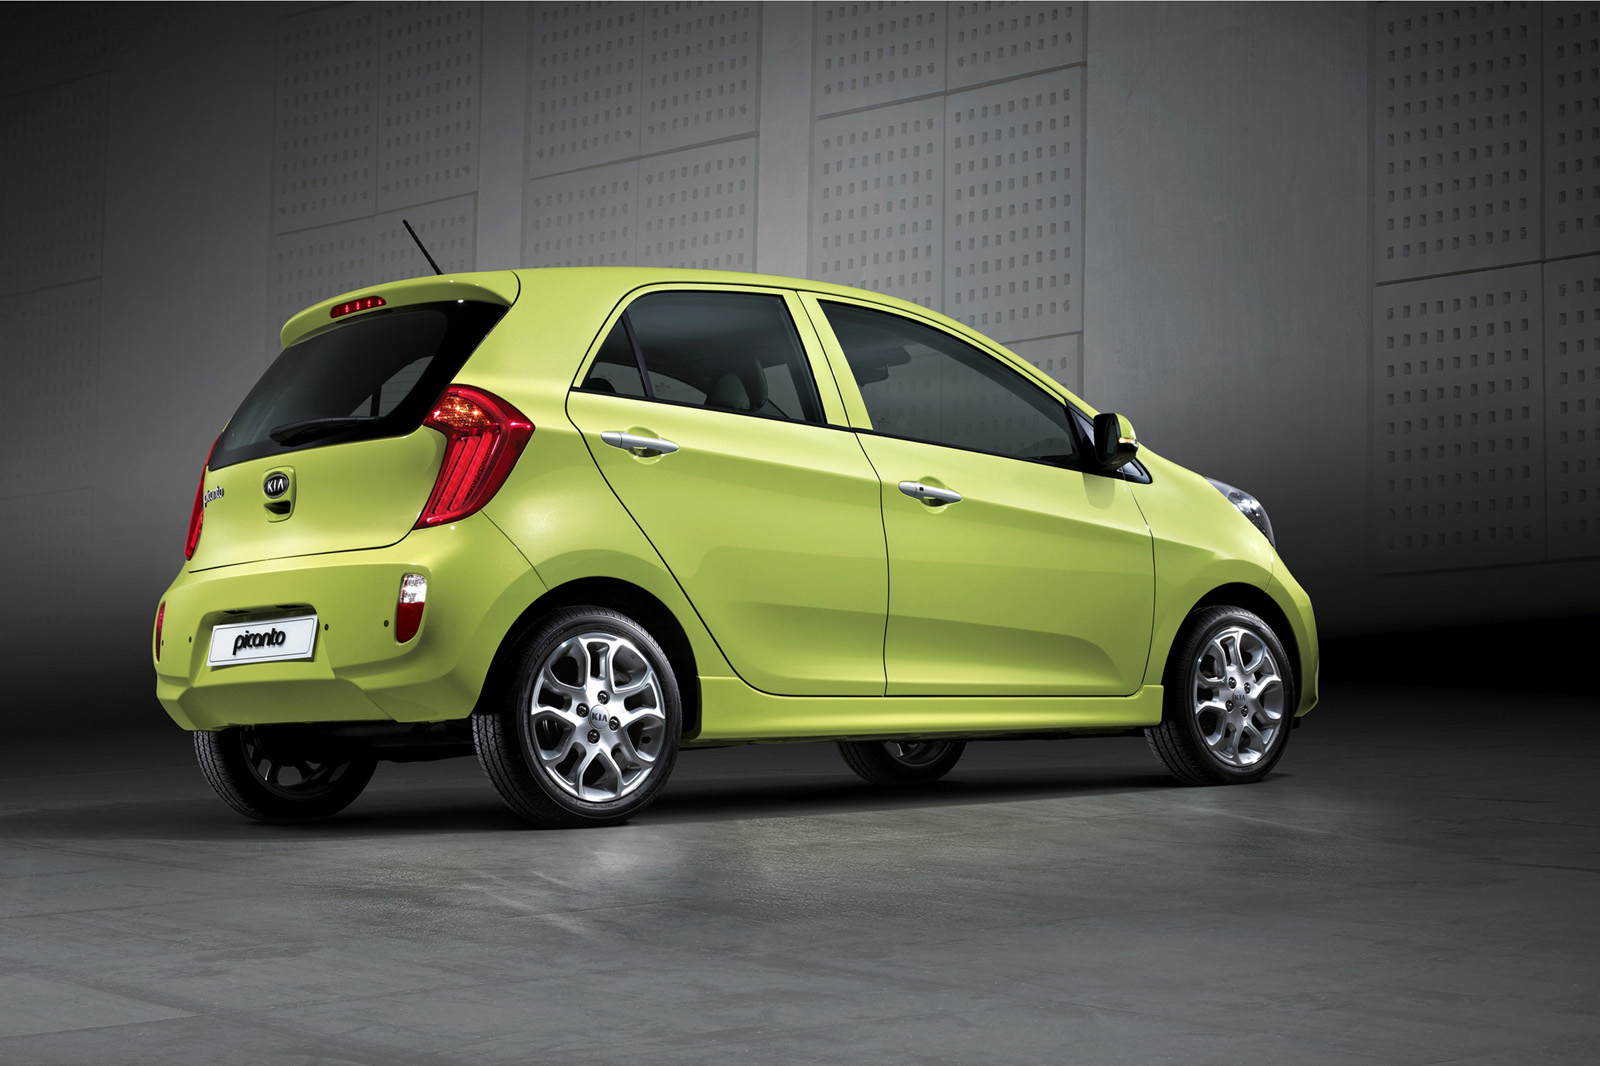 New Kia Picanto Revealed ~ Top car review